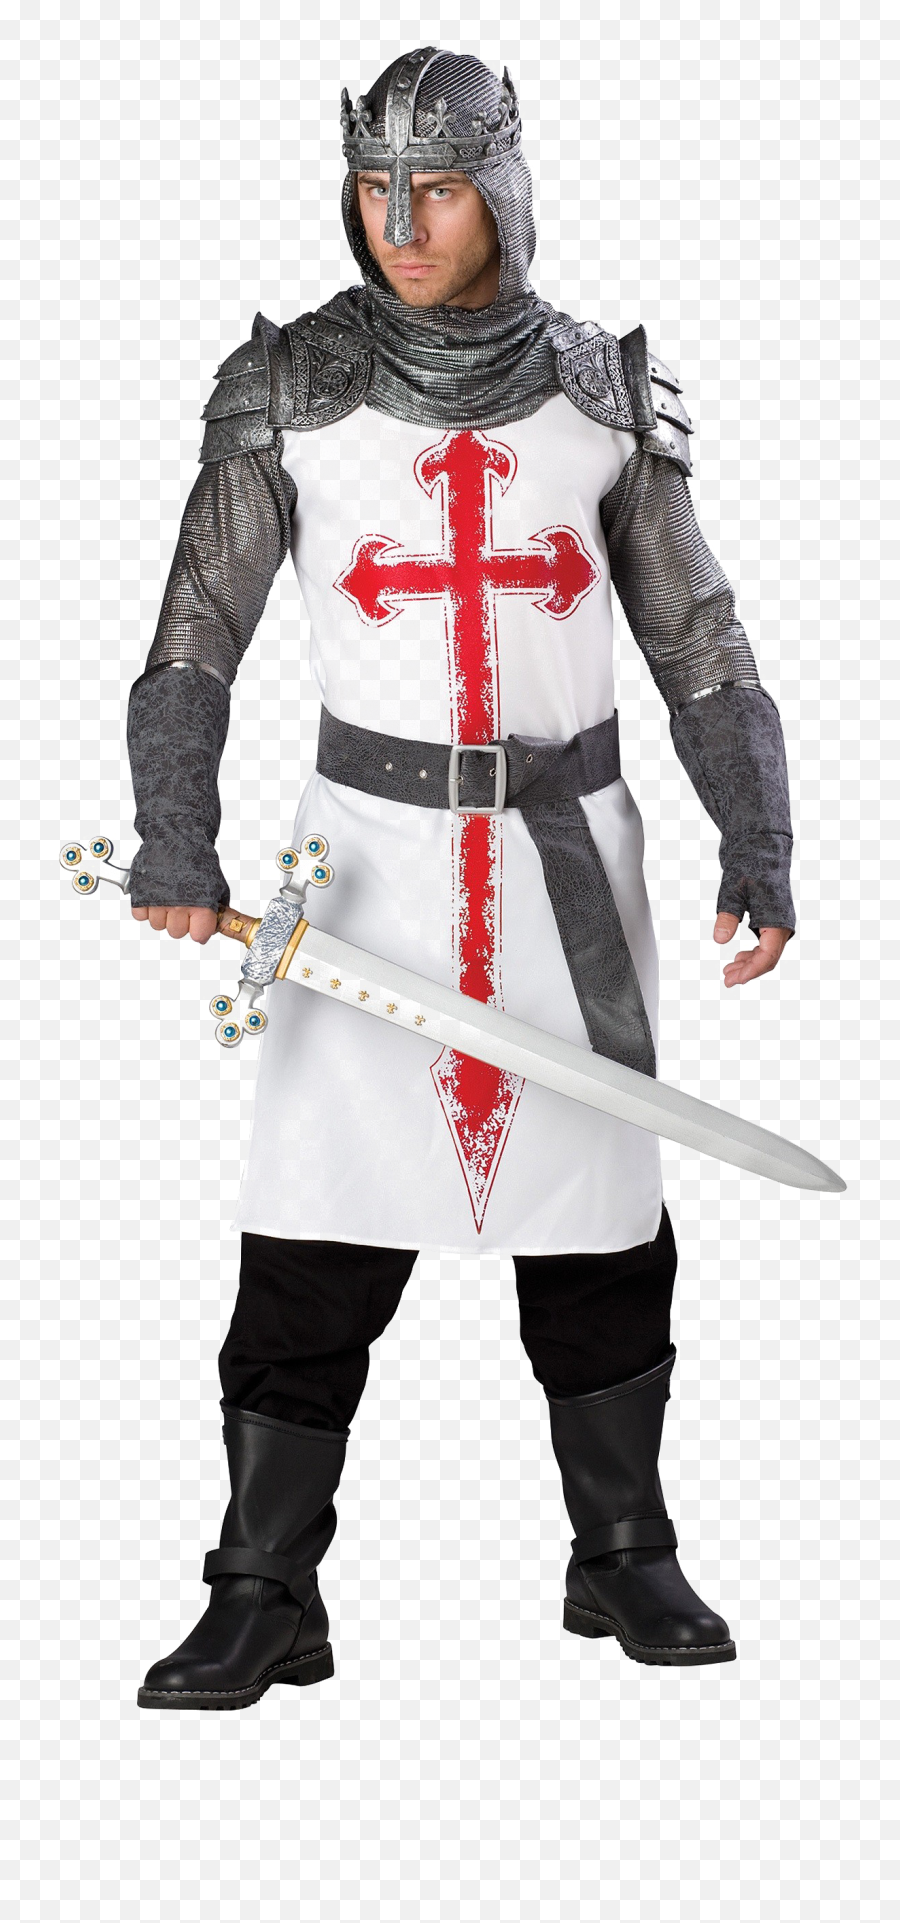 Download Hd Knight Png Background Image - Crusader Costume,Costume Png